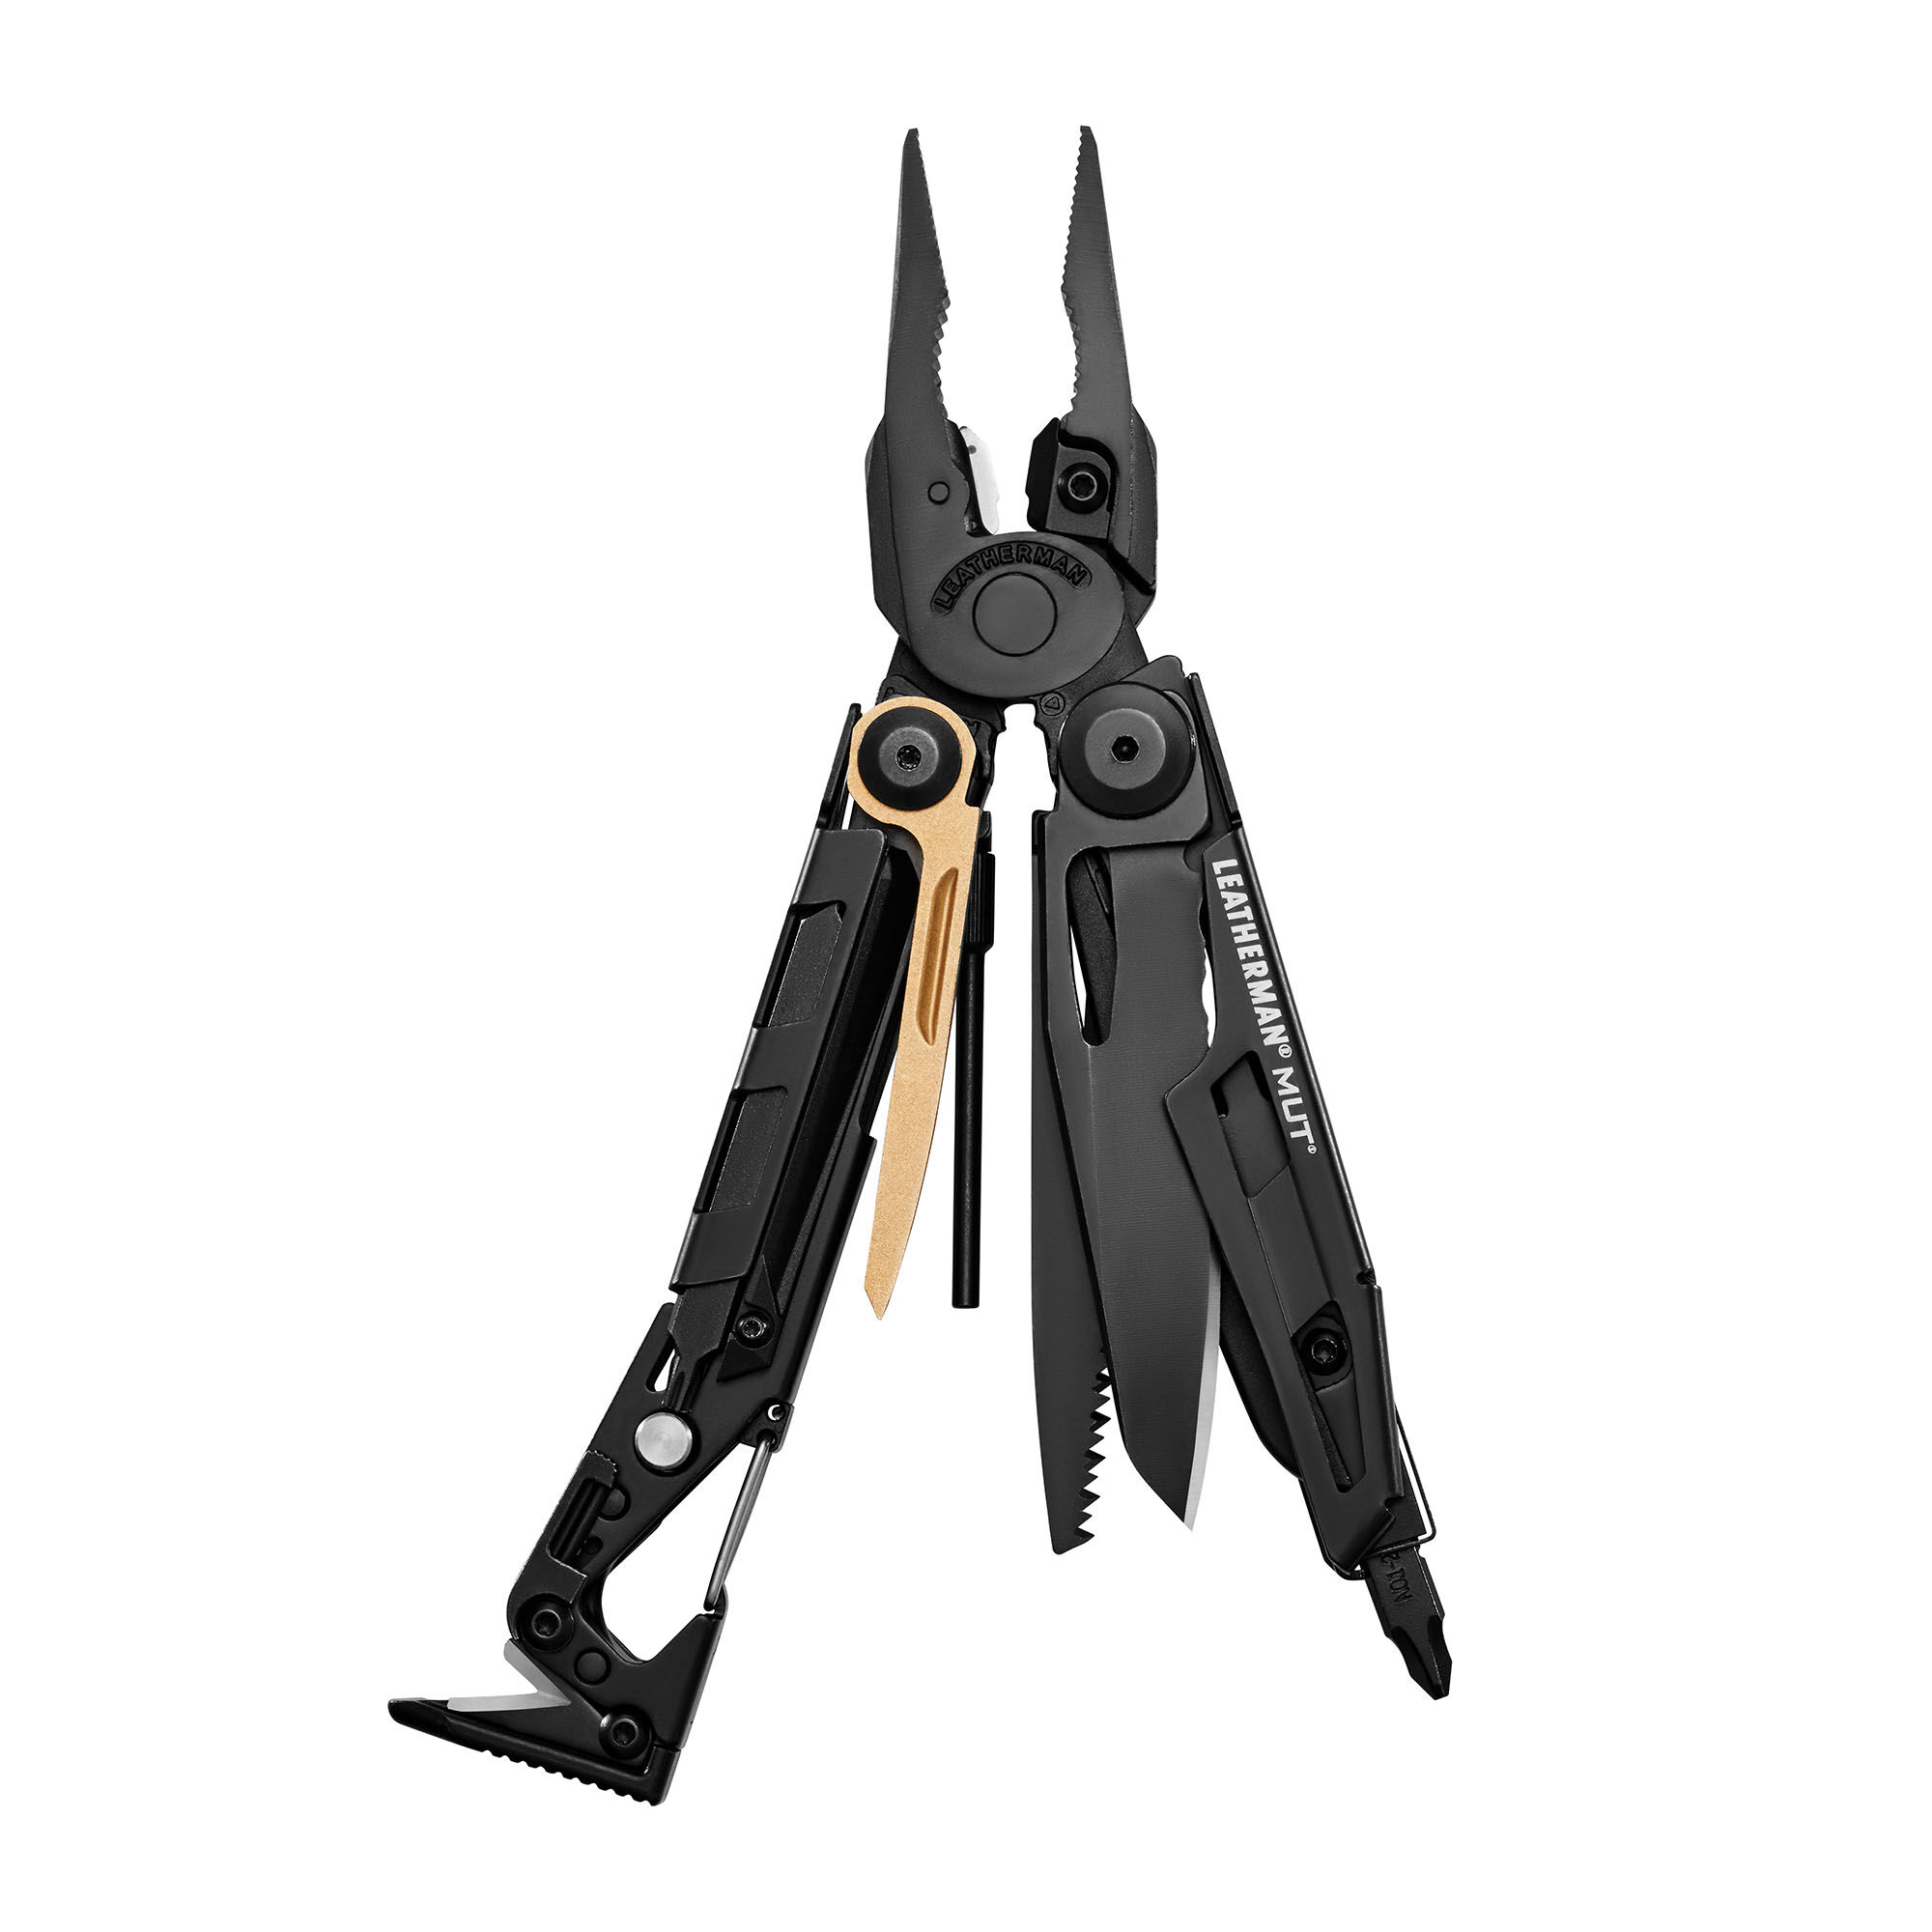 Wire Cutter - Precision Side 6 inch Cutting Pliers Hand Tools Home Improvement, Black